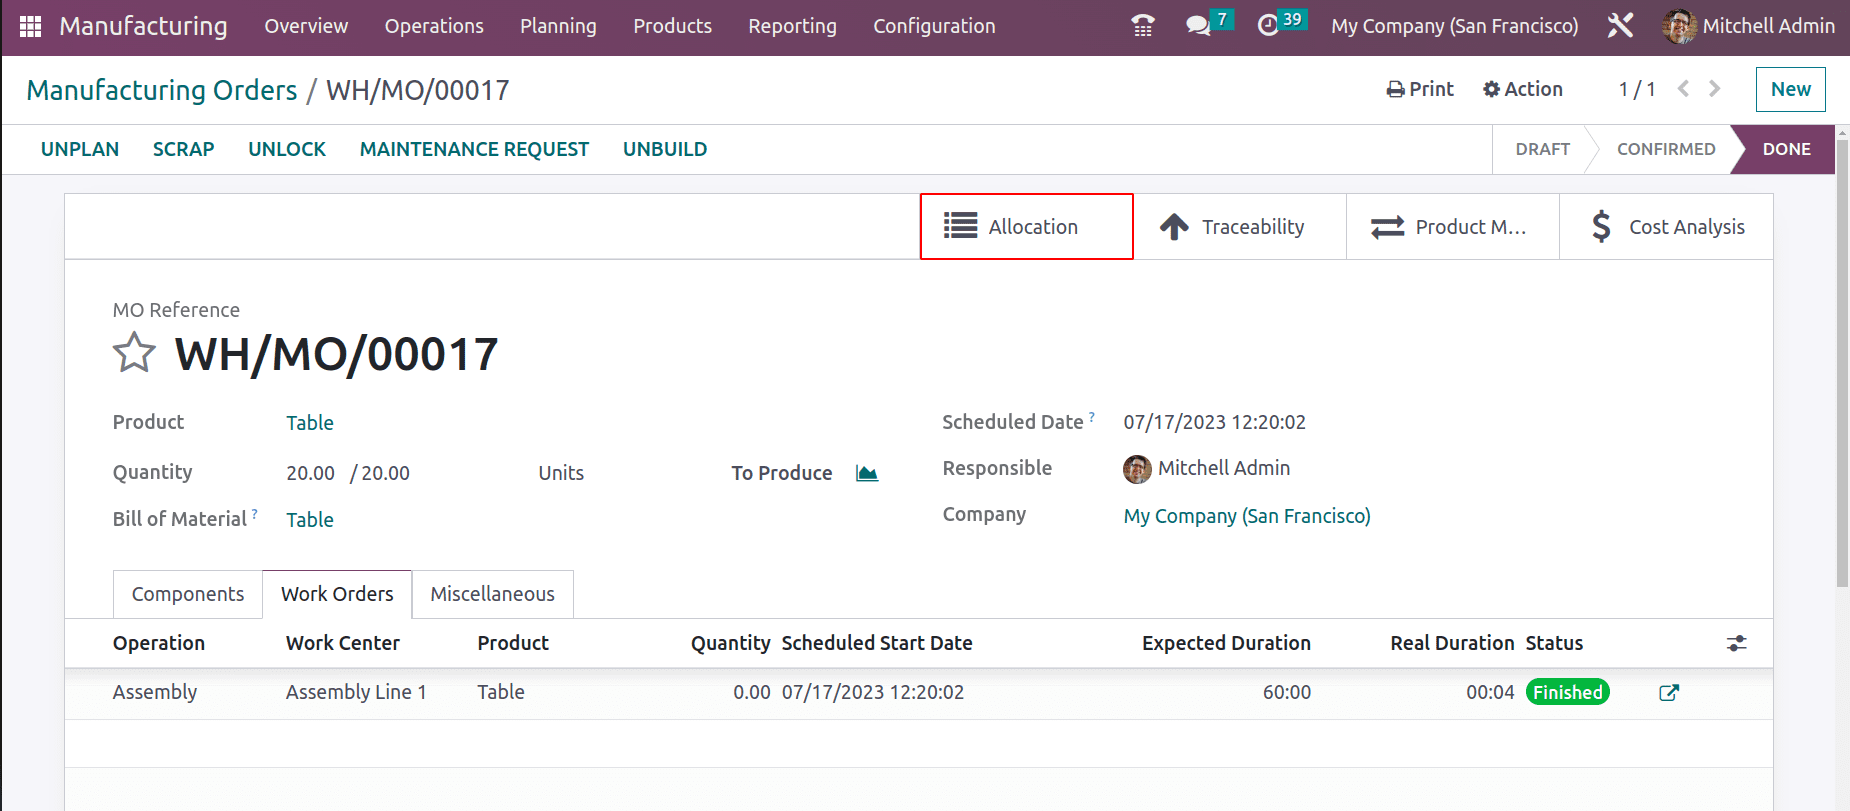 An Overview of Allocation Report for Manufacturing Orders in Odoo 16-cybrosys